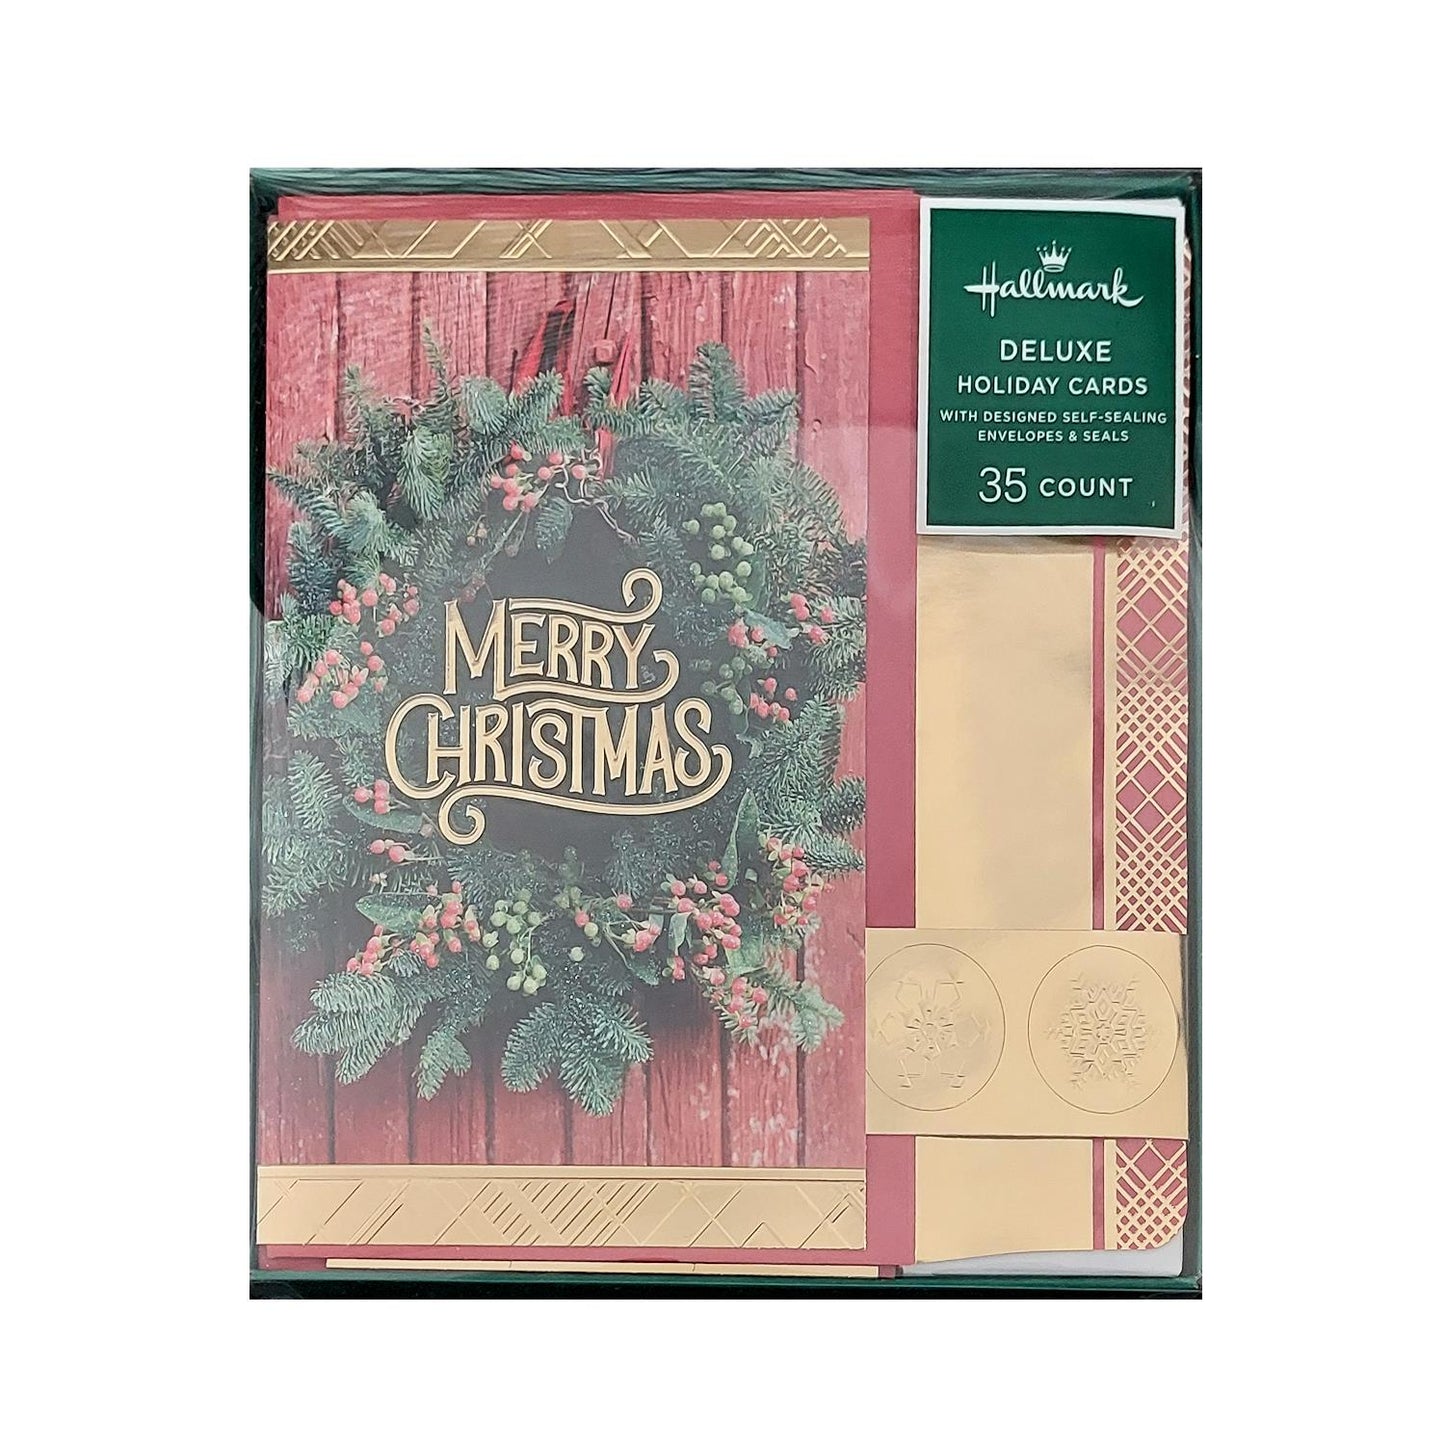 Hallmark Boxed Deluxe Christmas Cards Merry Christmas Wreath 35 Cards, Designed Self-Sealing Envelopes and Seals